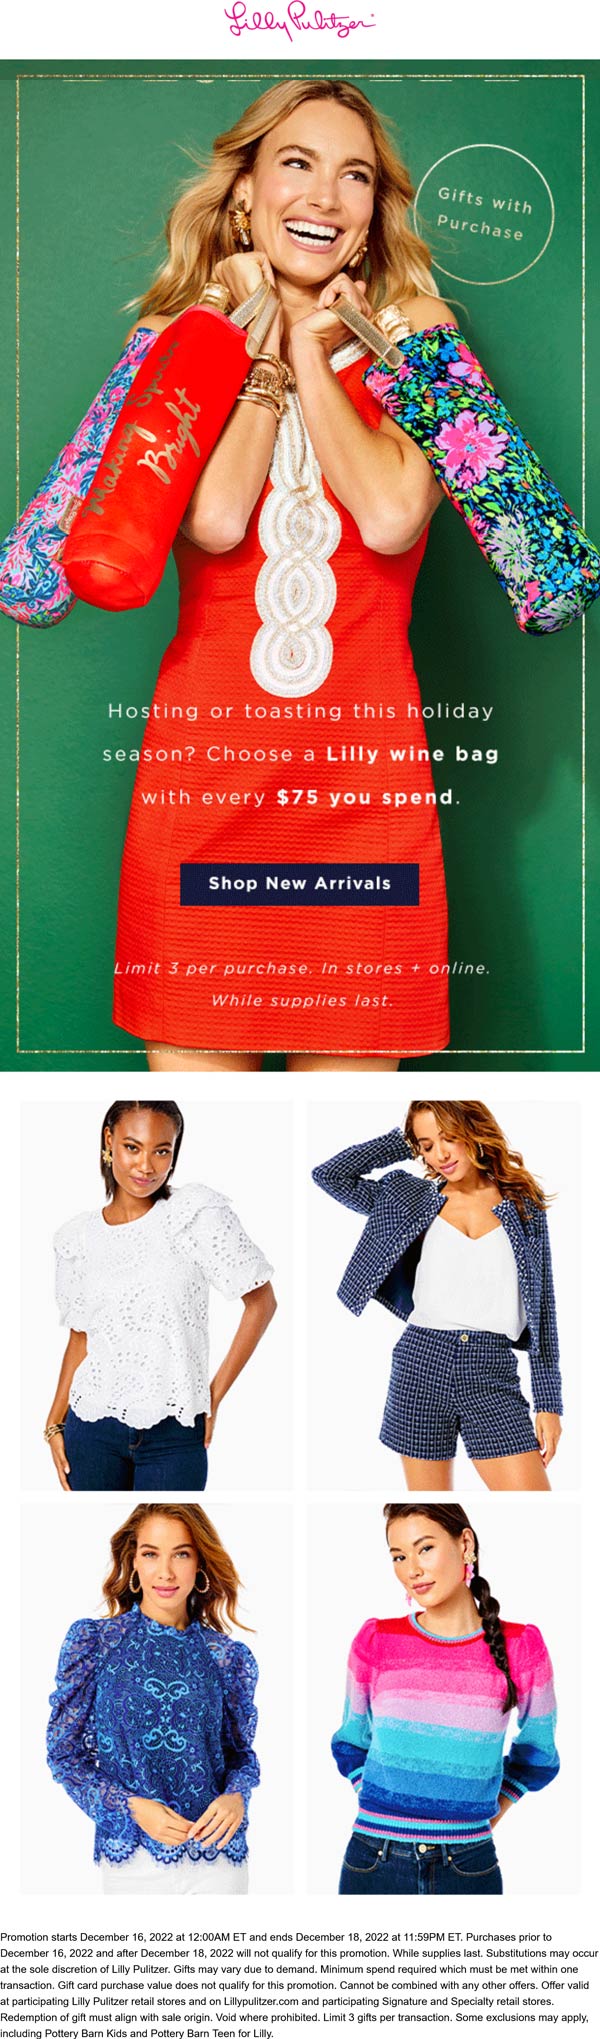 Lilly Pulitzer stores Coupon  Free wine bag on every $75 at Lilly Pulitzer, ditto online #lillypulitzer 